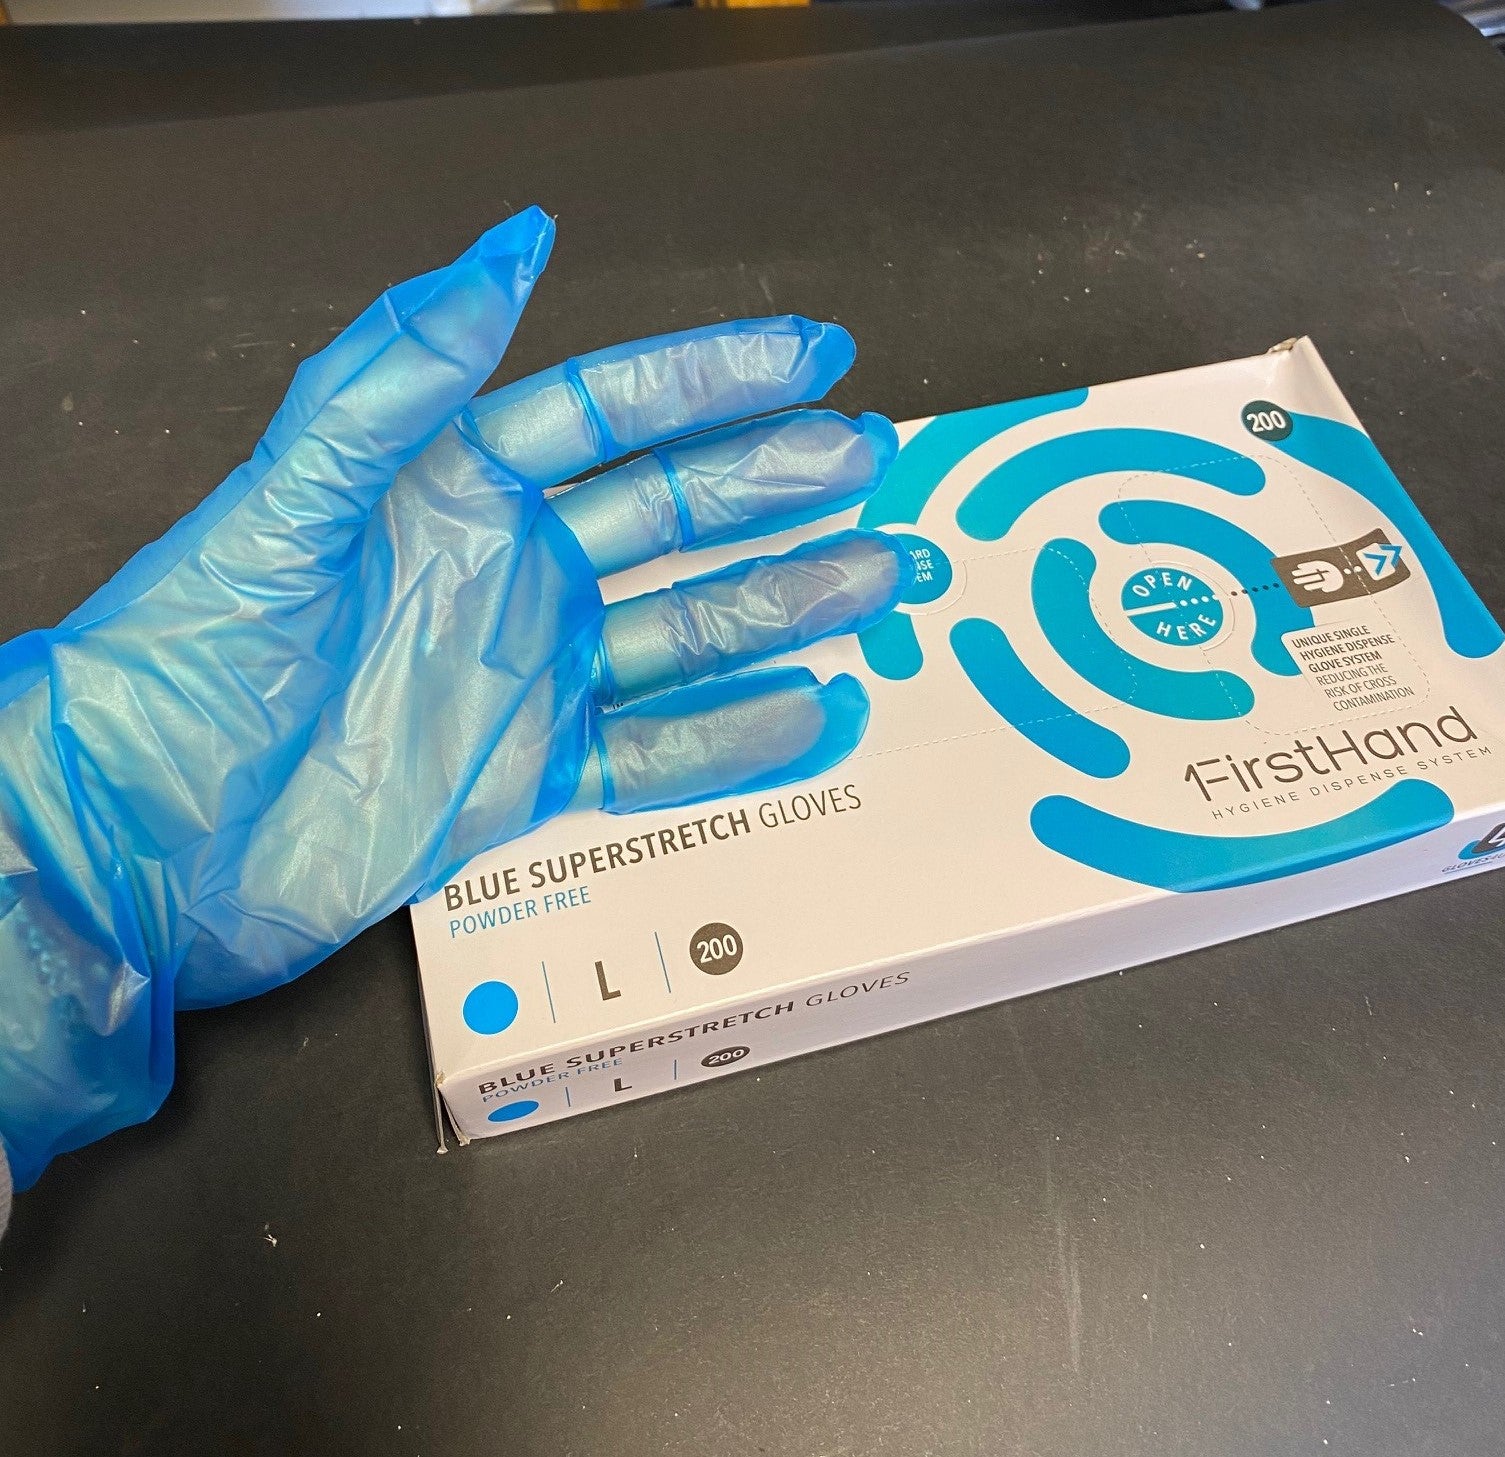 Powder-Free Super stretched Disposable Glove